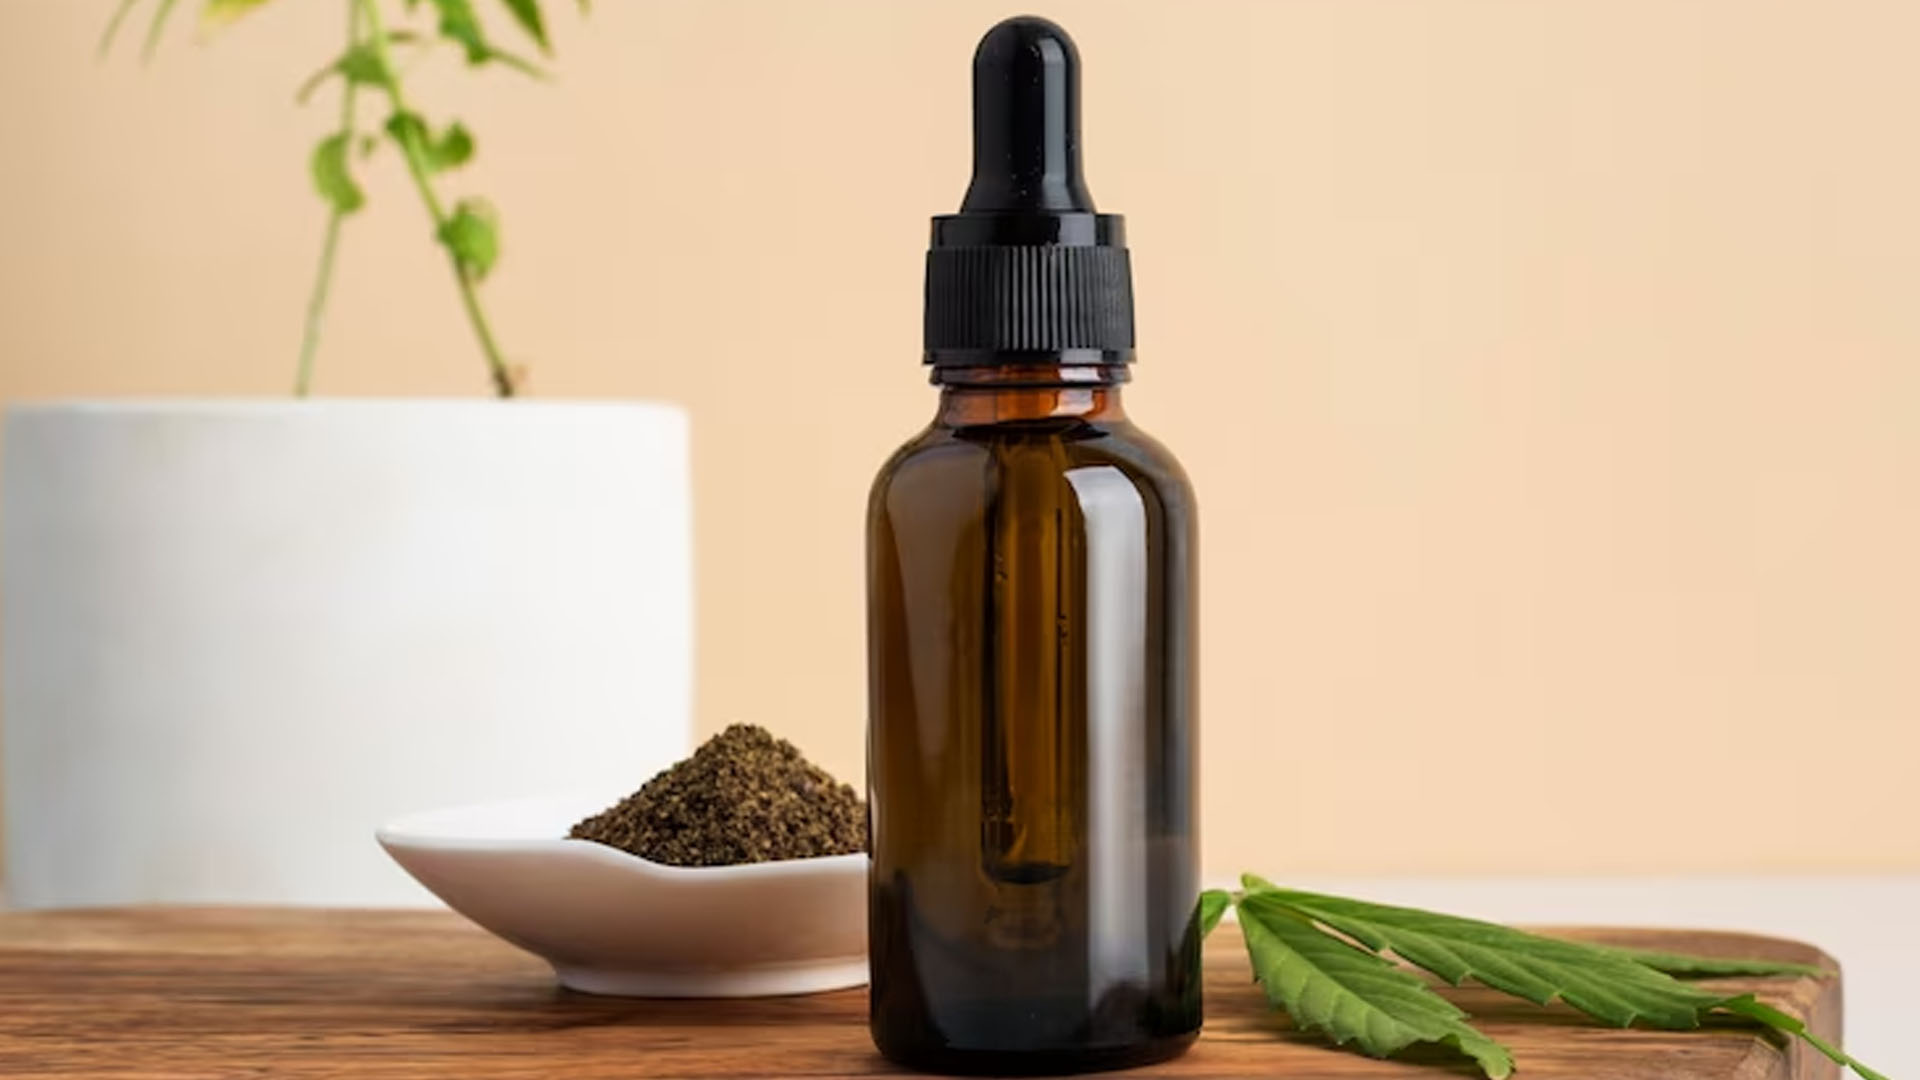 What Are The Health Benefits of Hemp Seed Oil?